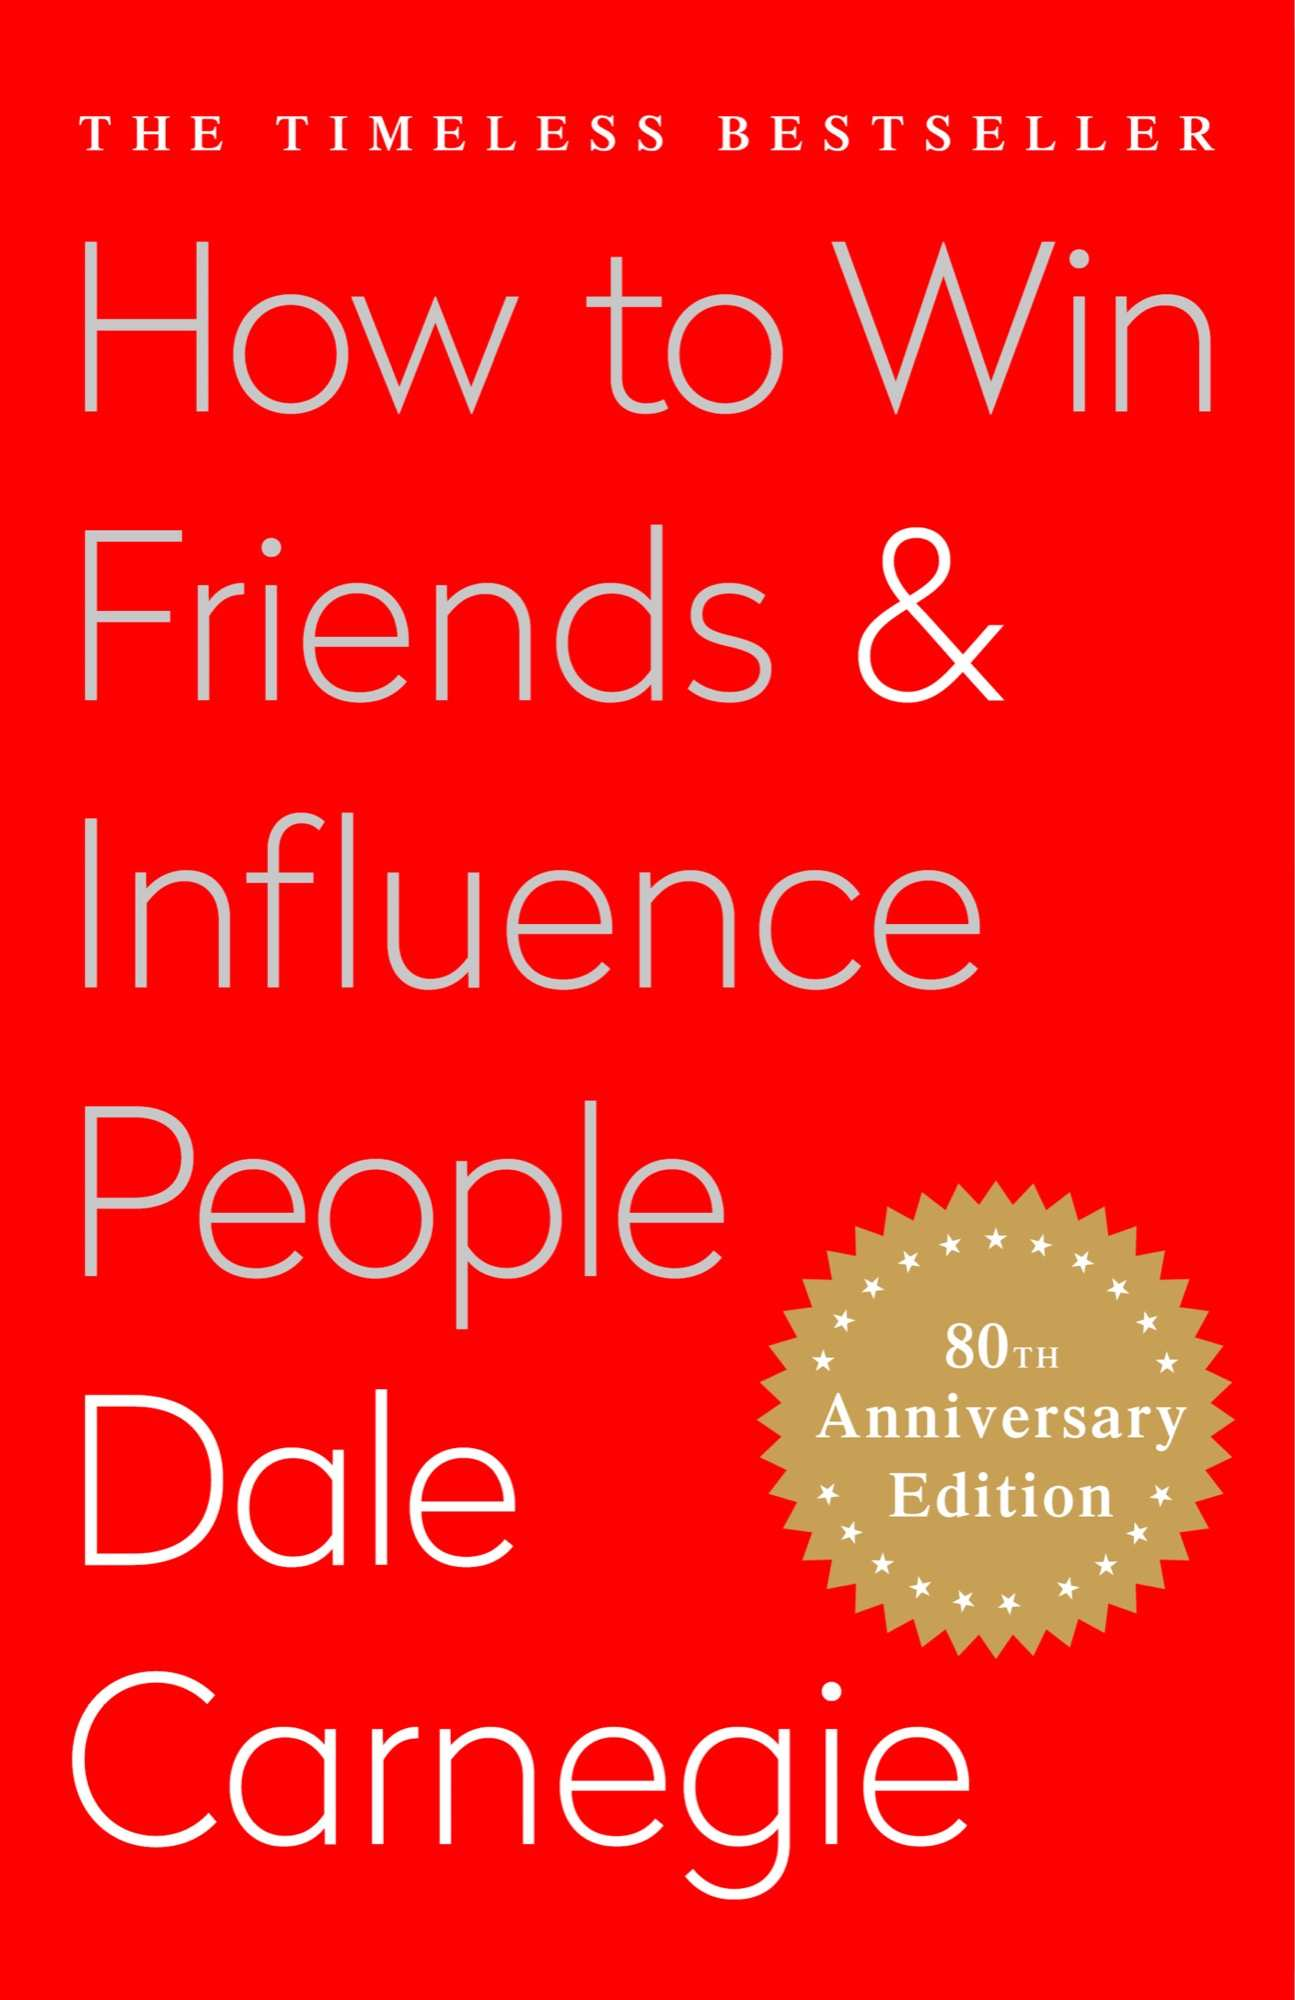 Book summary for How to Win Friends and Influence People